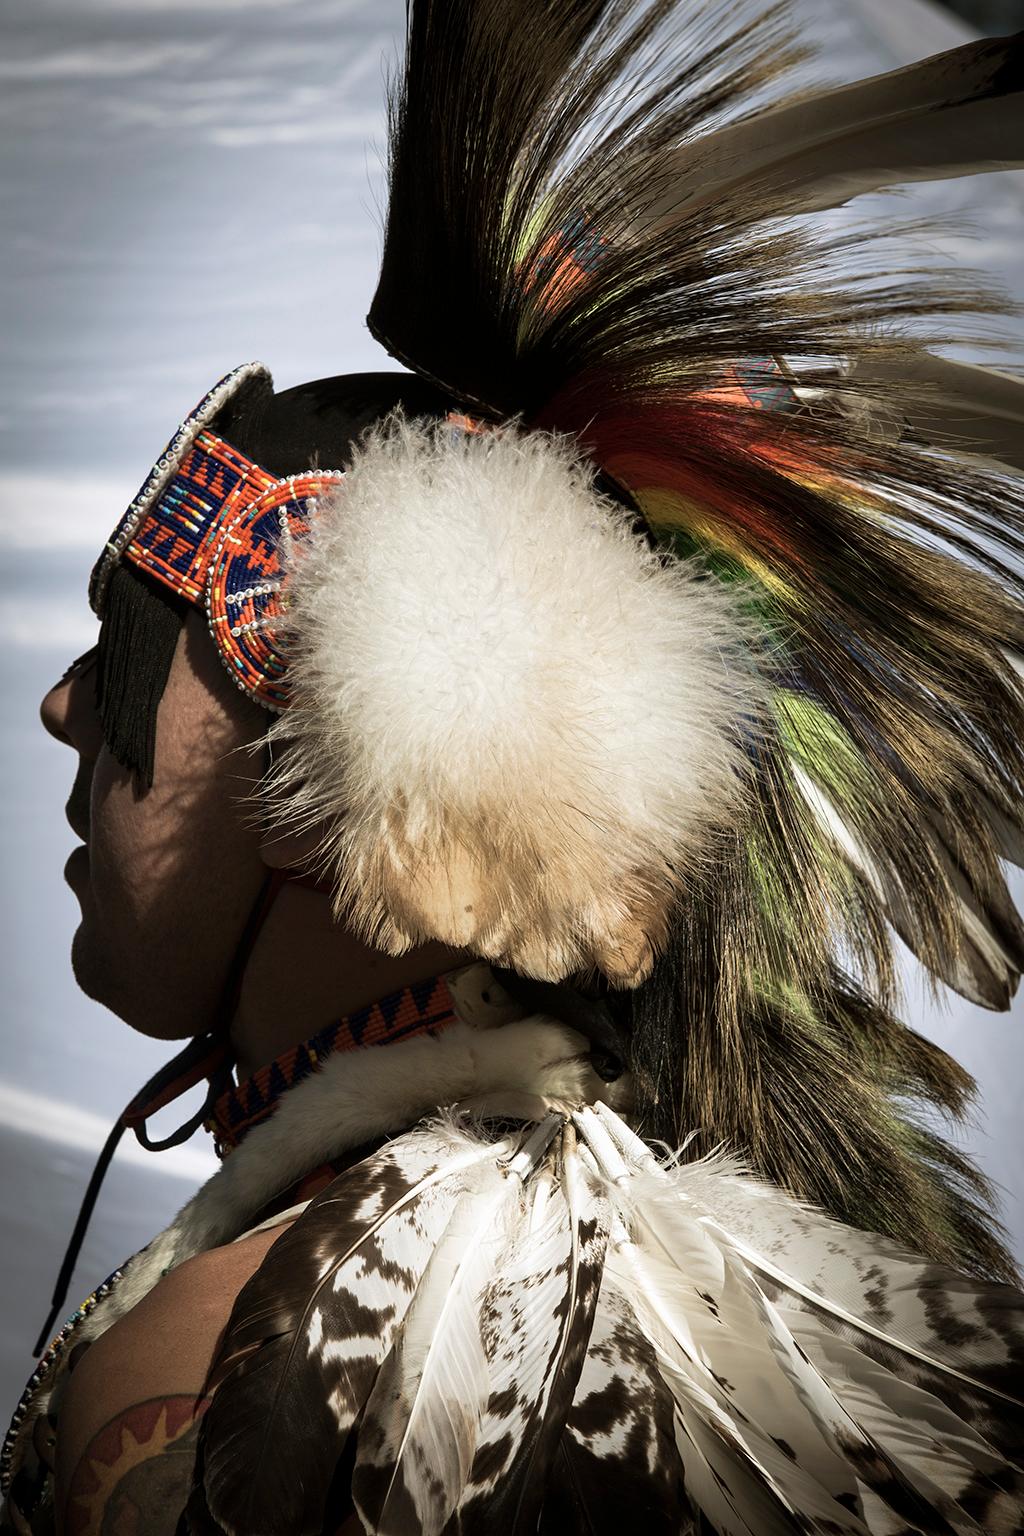  Cosmo Condina Color Photograph - Portrait of First Nations Male Dancer in Traditional North American Costume